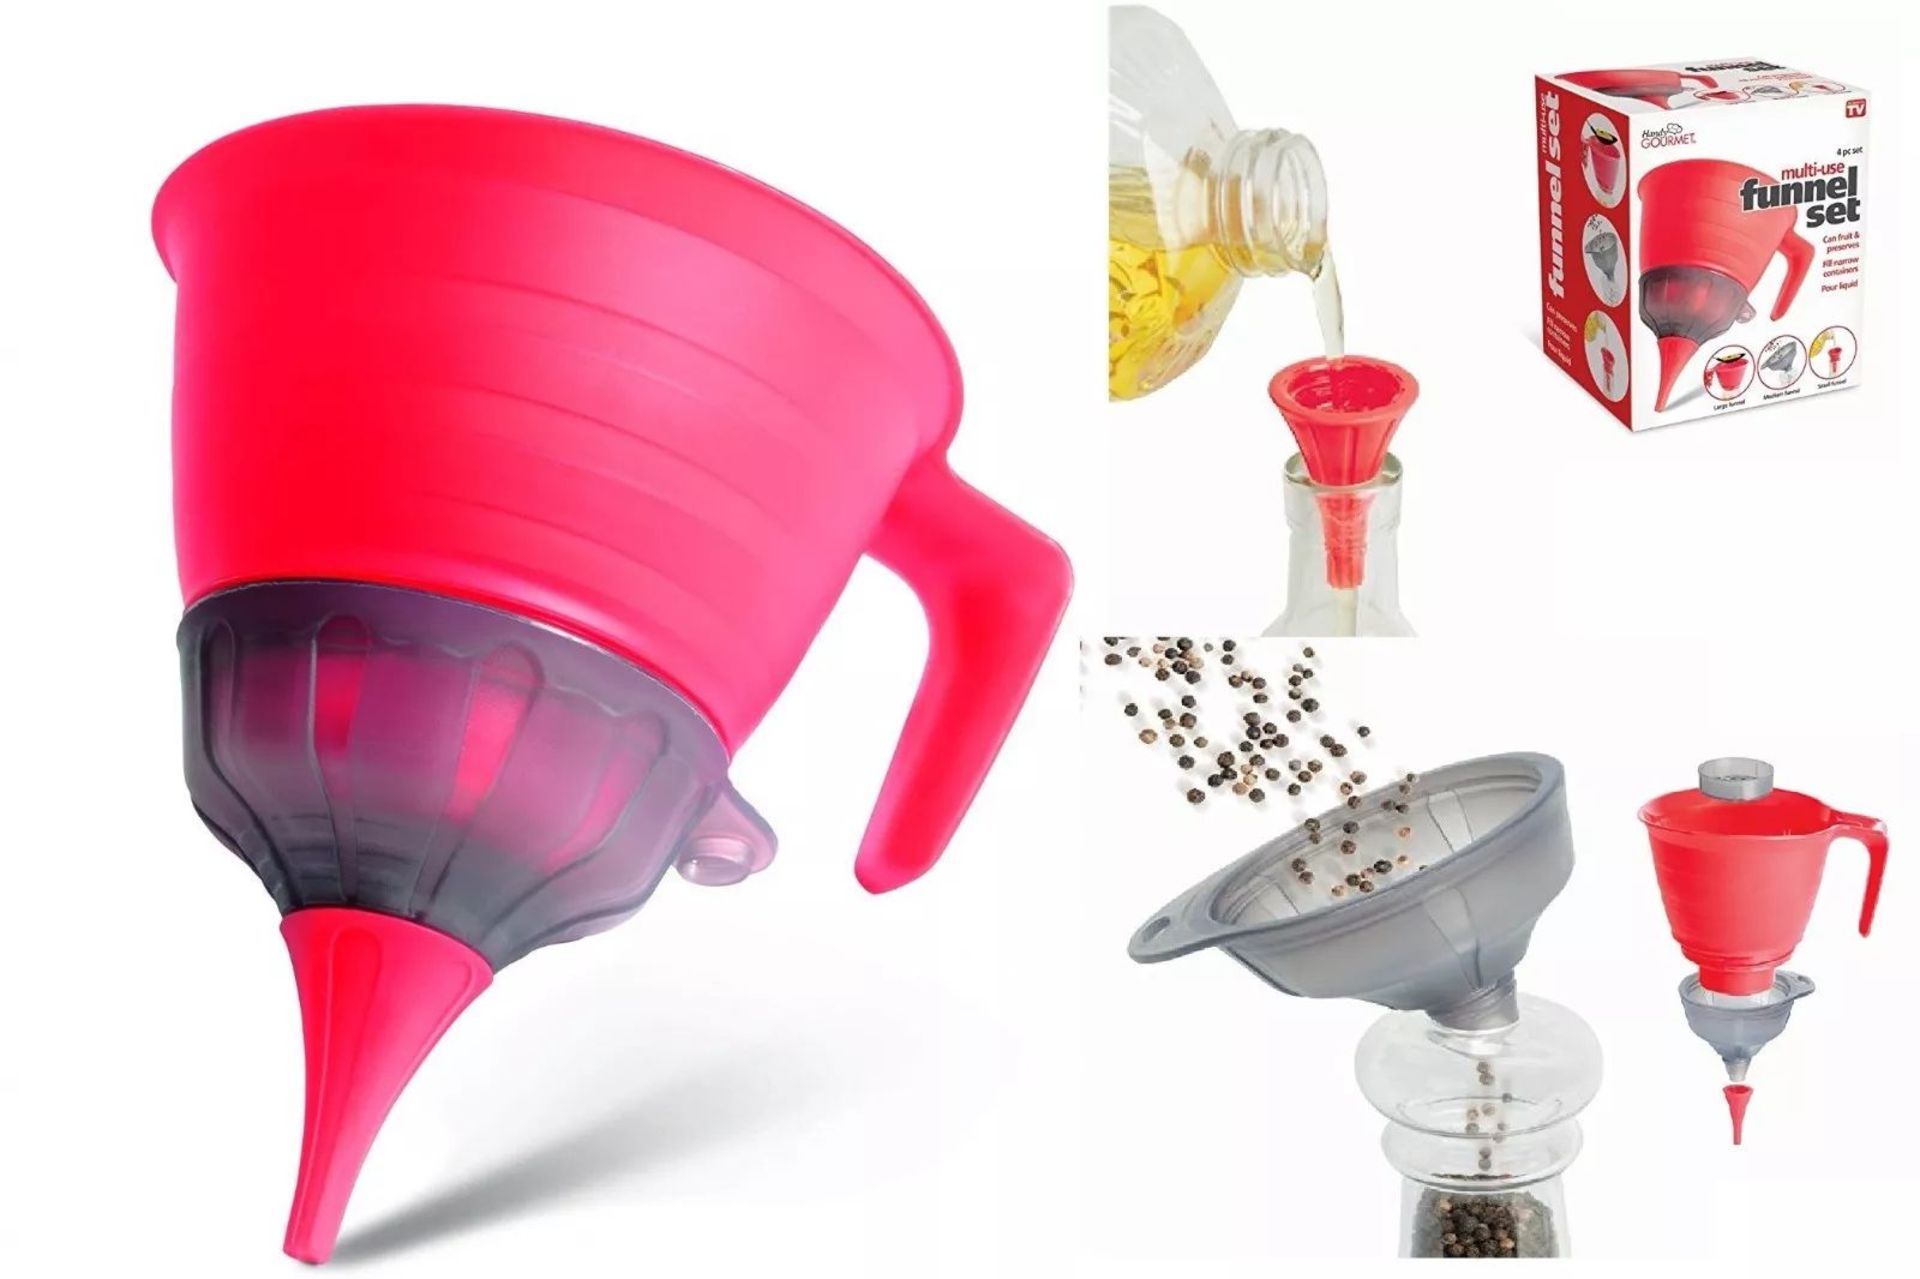 50x BRAND NEW 3 in 1 Small Medium Large Kitchen Funnel Set. RRP £4.99 EACH. A great kitchen - Image 3 of 3